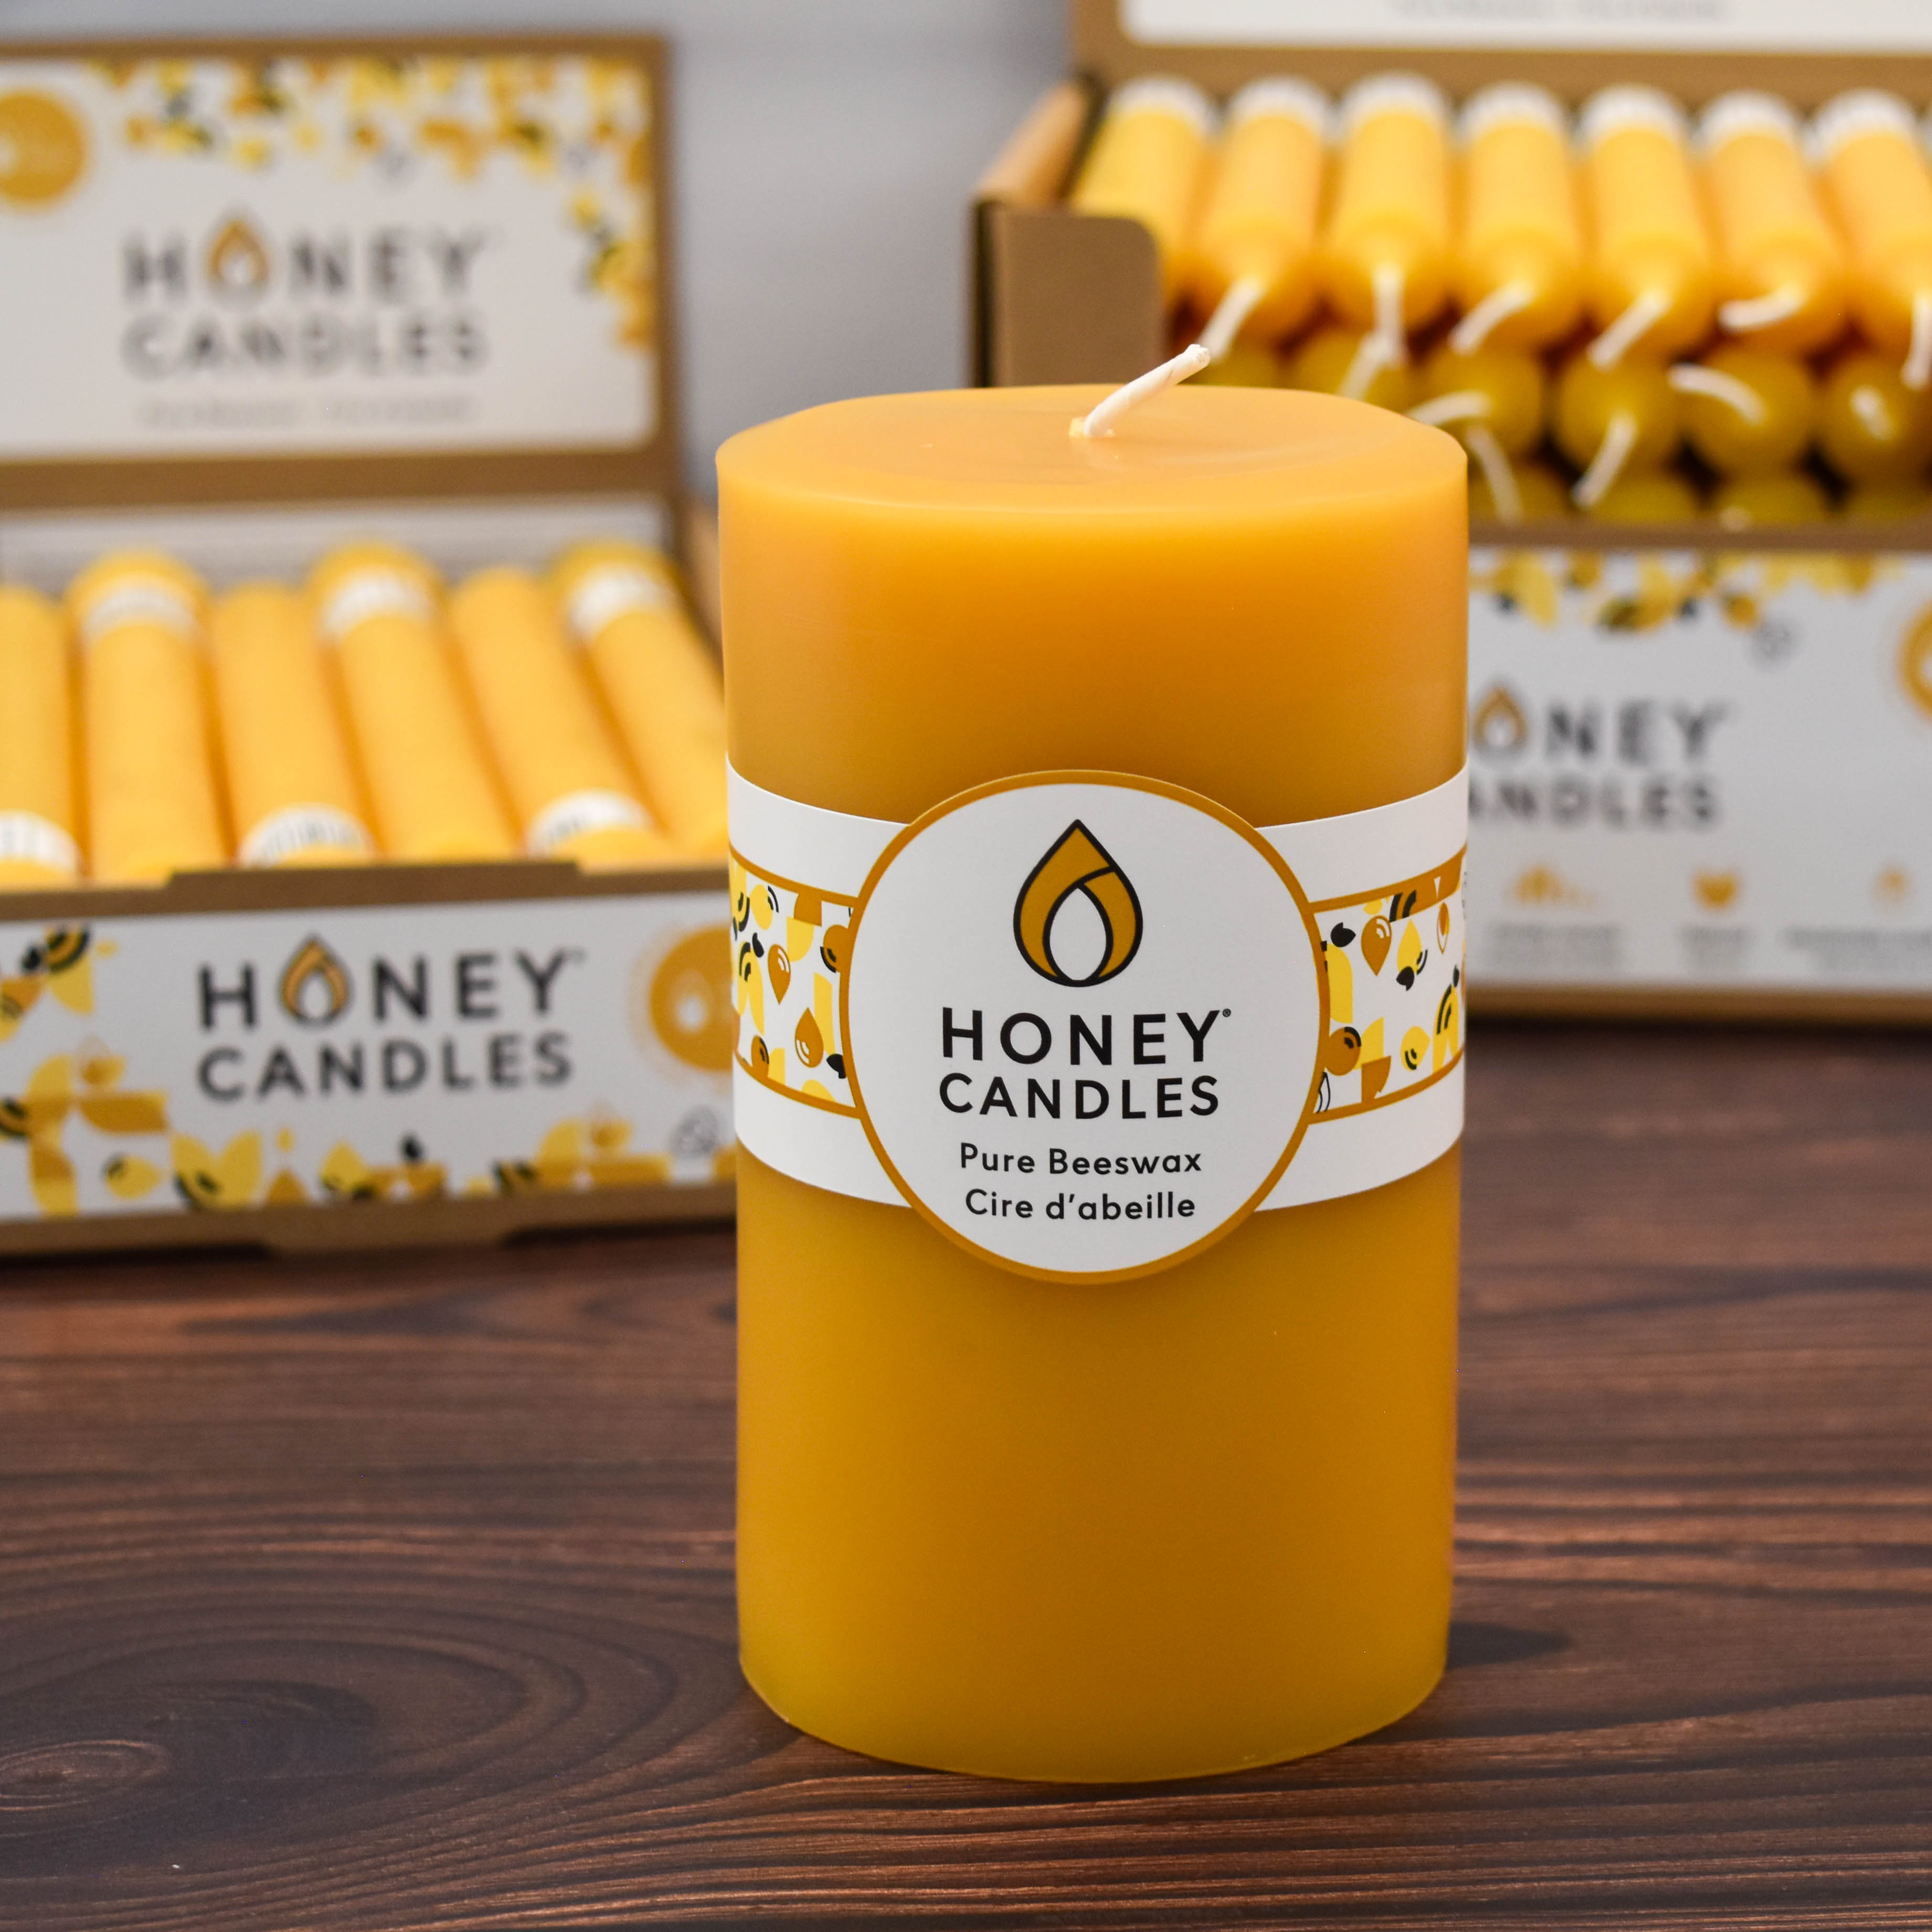 Wholesale Beeswax Candles Program – Honey Candles Canada